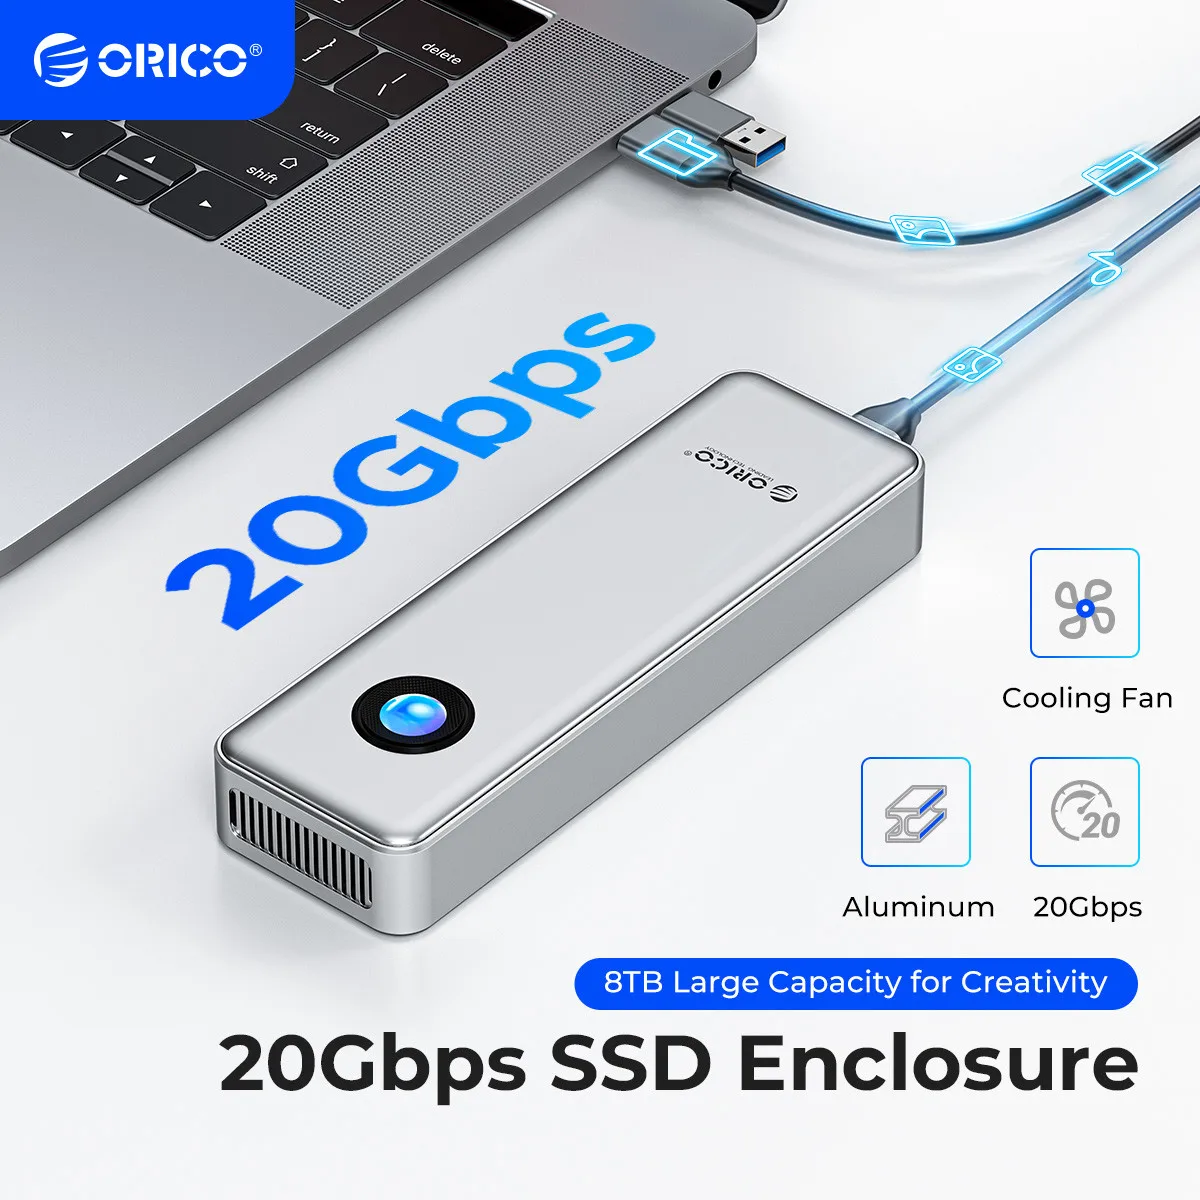 

ORICO 20Gbps NVME Enclosure Case 8TB with Cooling Fan USB 3.2 Gen 2 x 2 PCIE NVME Adapter Tool Free RGB for PCIe M Key